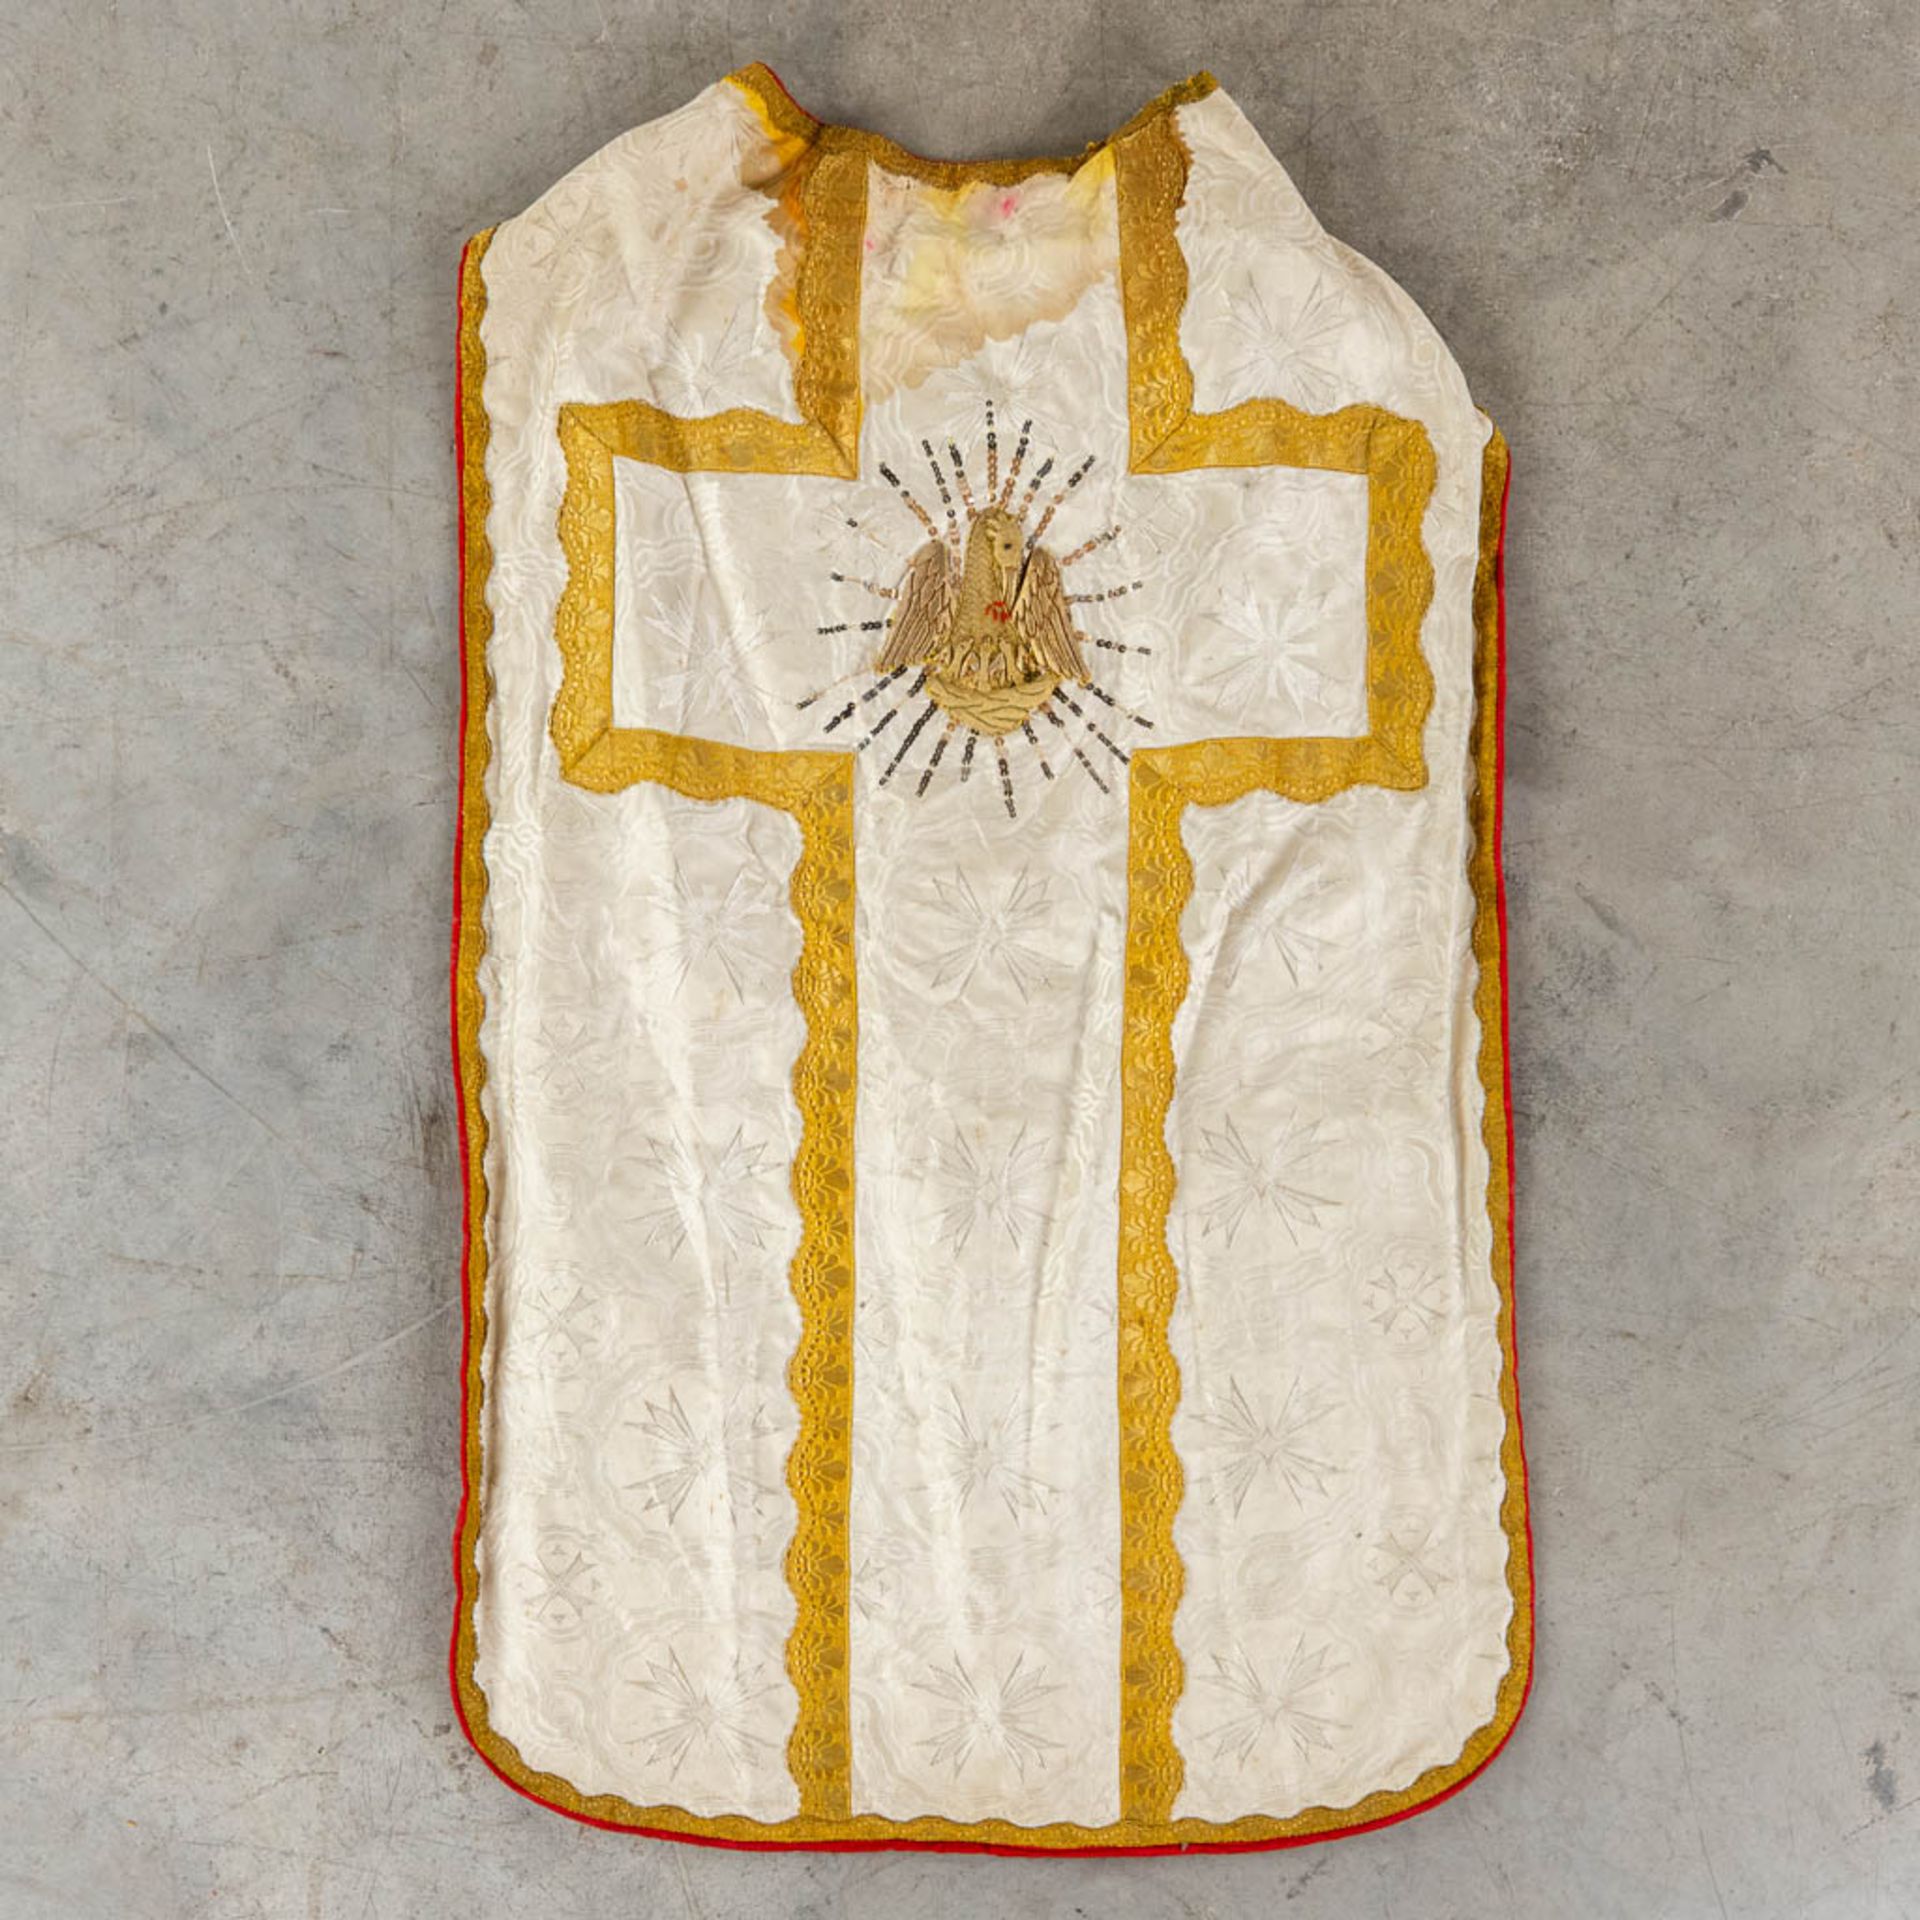 4 embroidered altar pieces, a Roman Chasuble and Chalice Veil, thick gold and silver thread embroide - Image 13 of 14